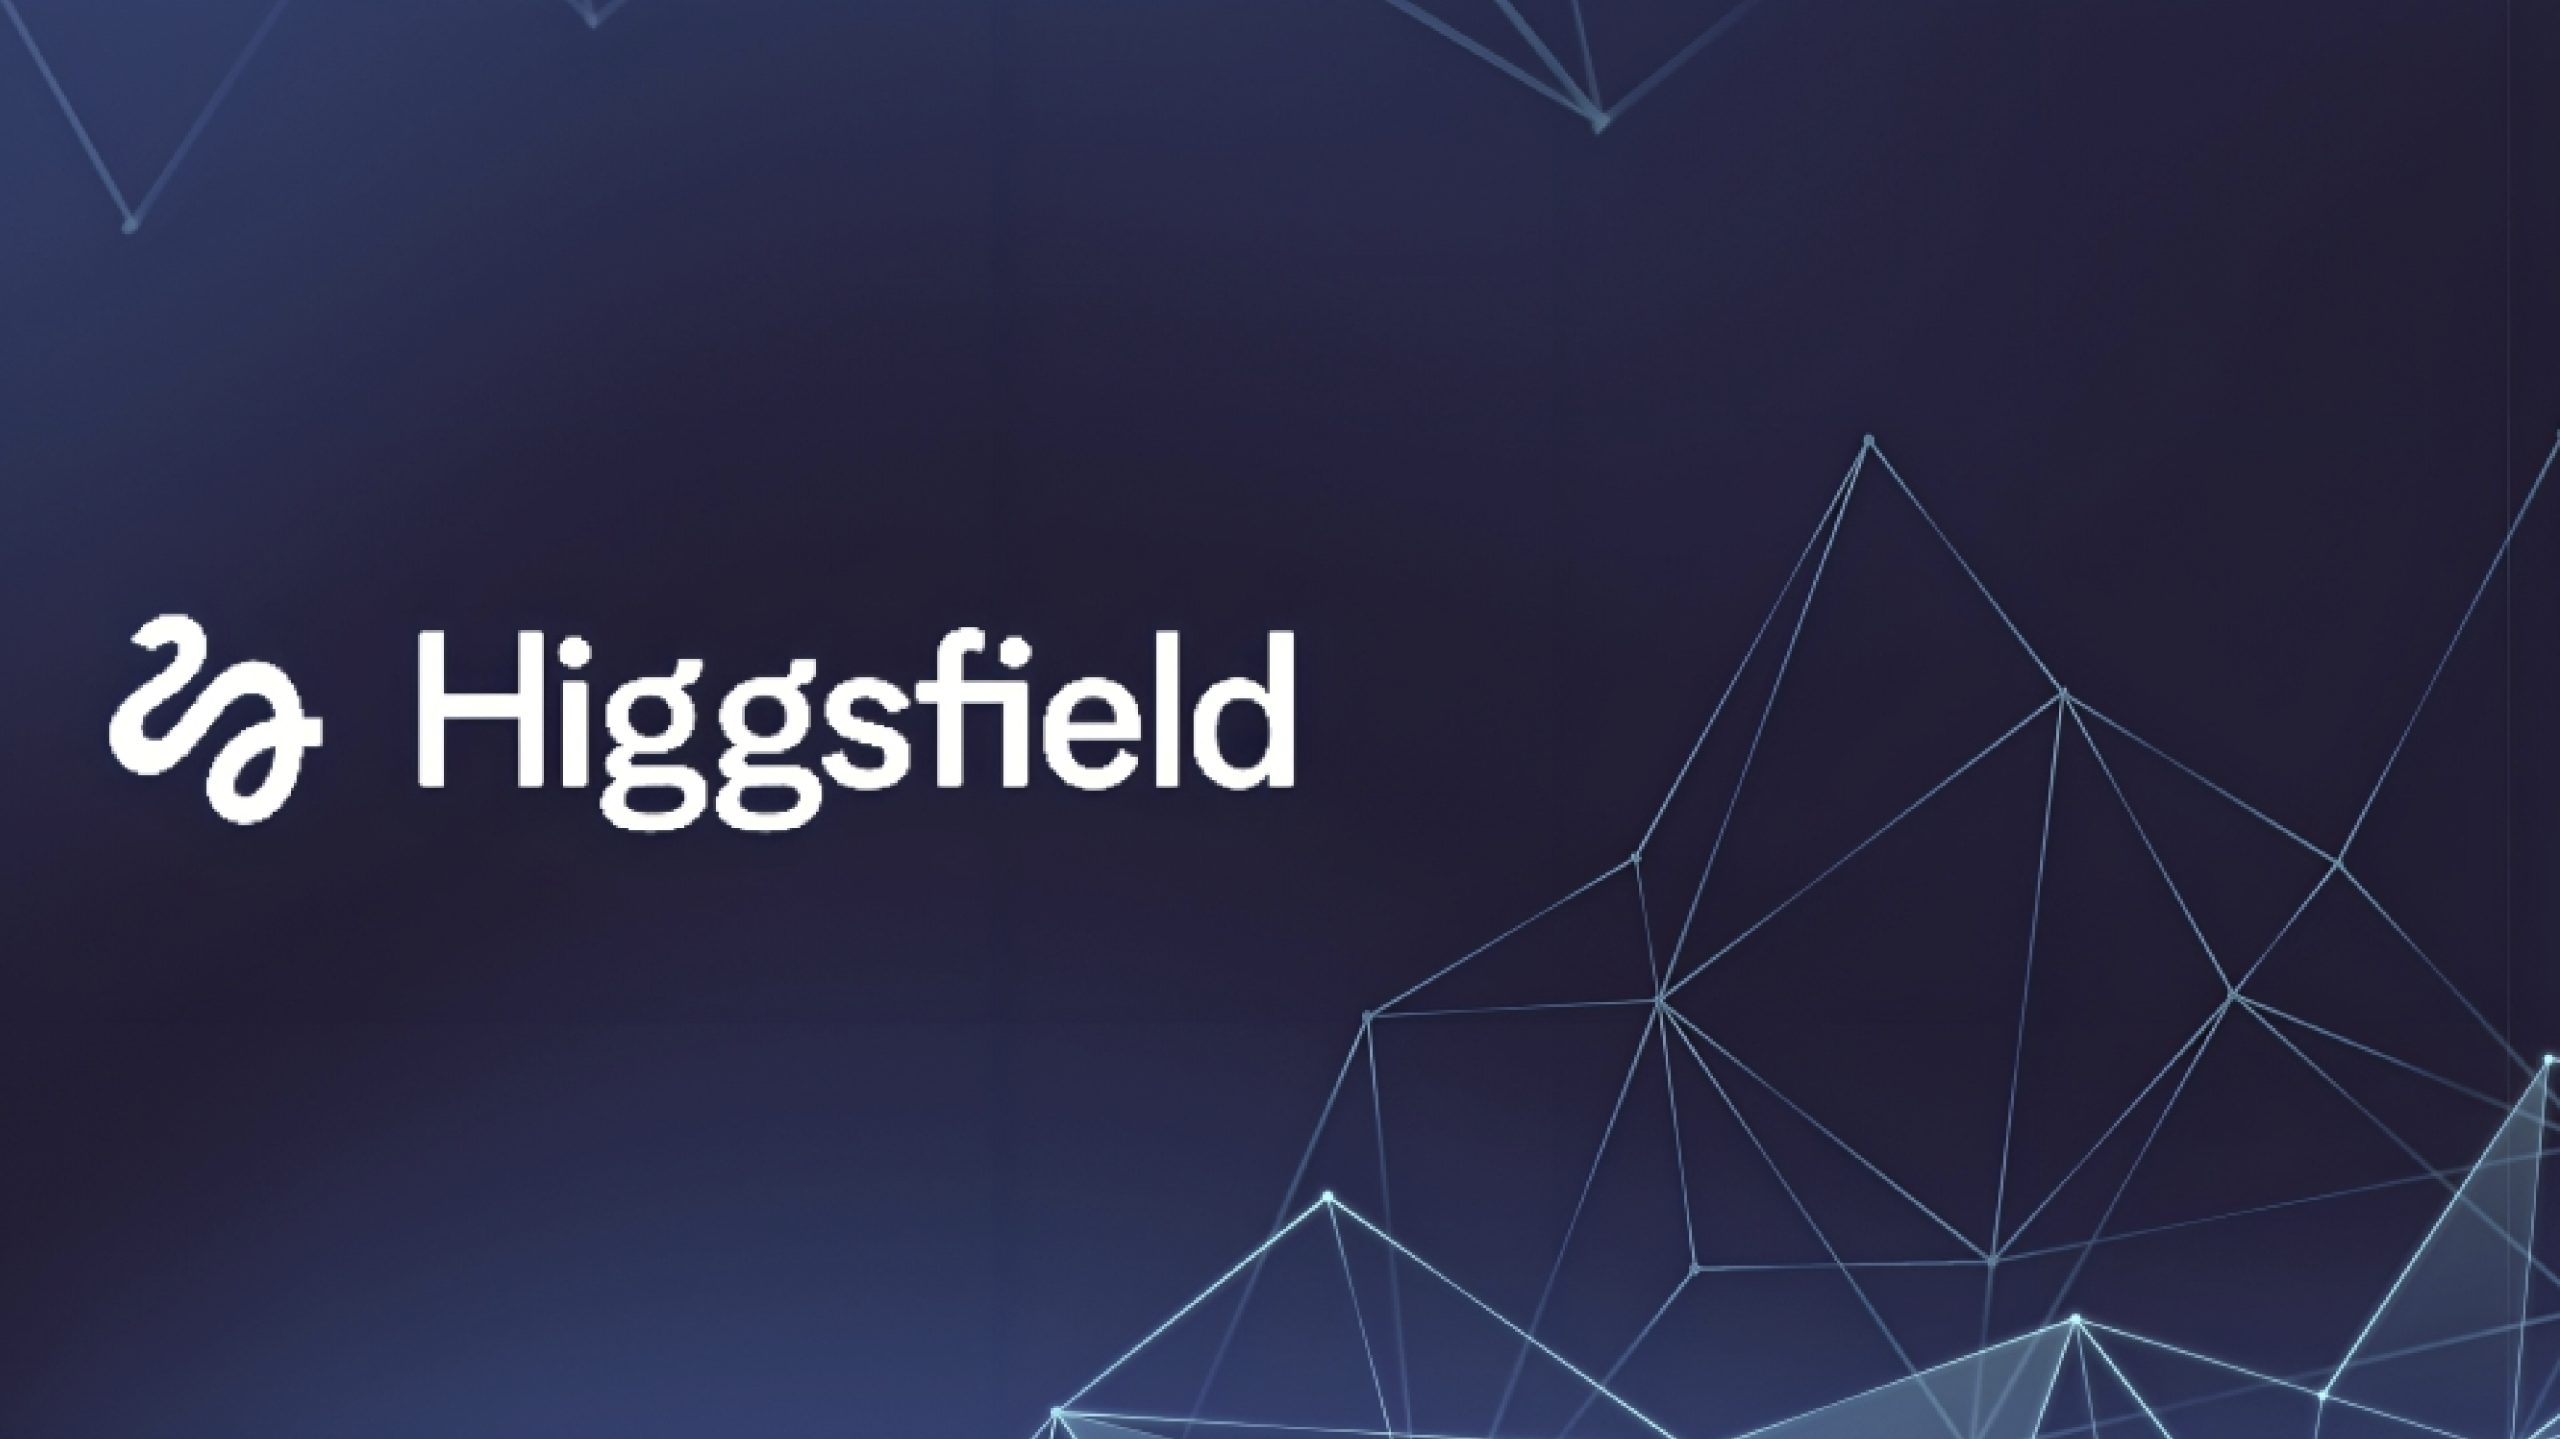 Sora's New Contender: Introducing Higgsfield's Advanced Video AI